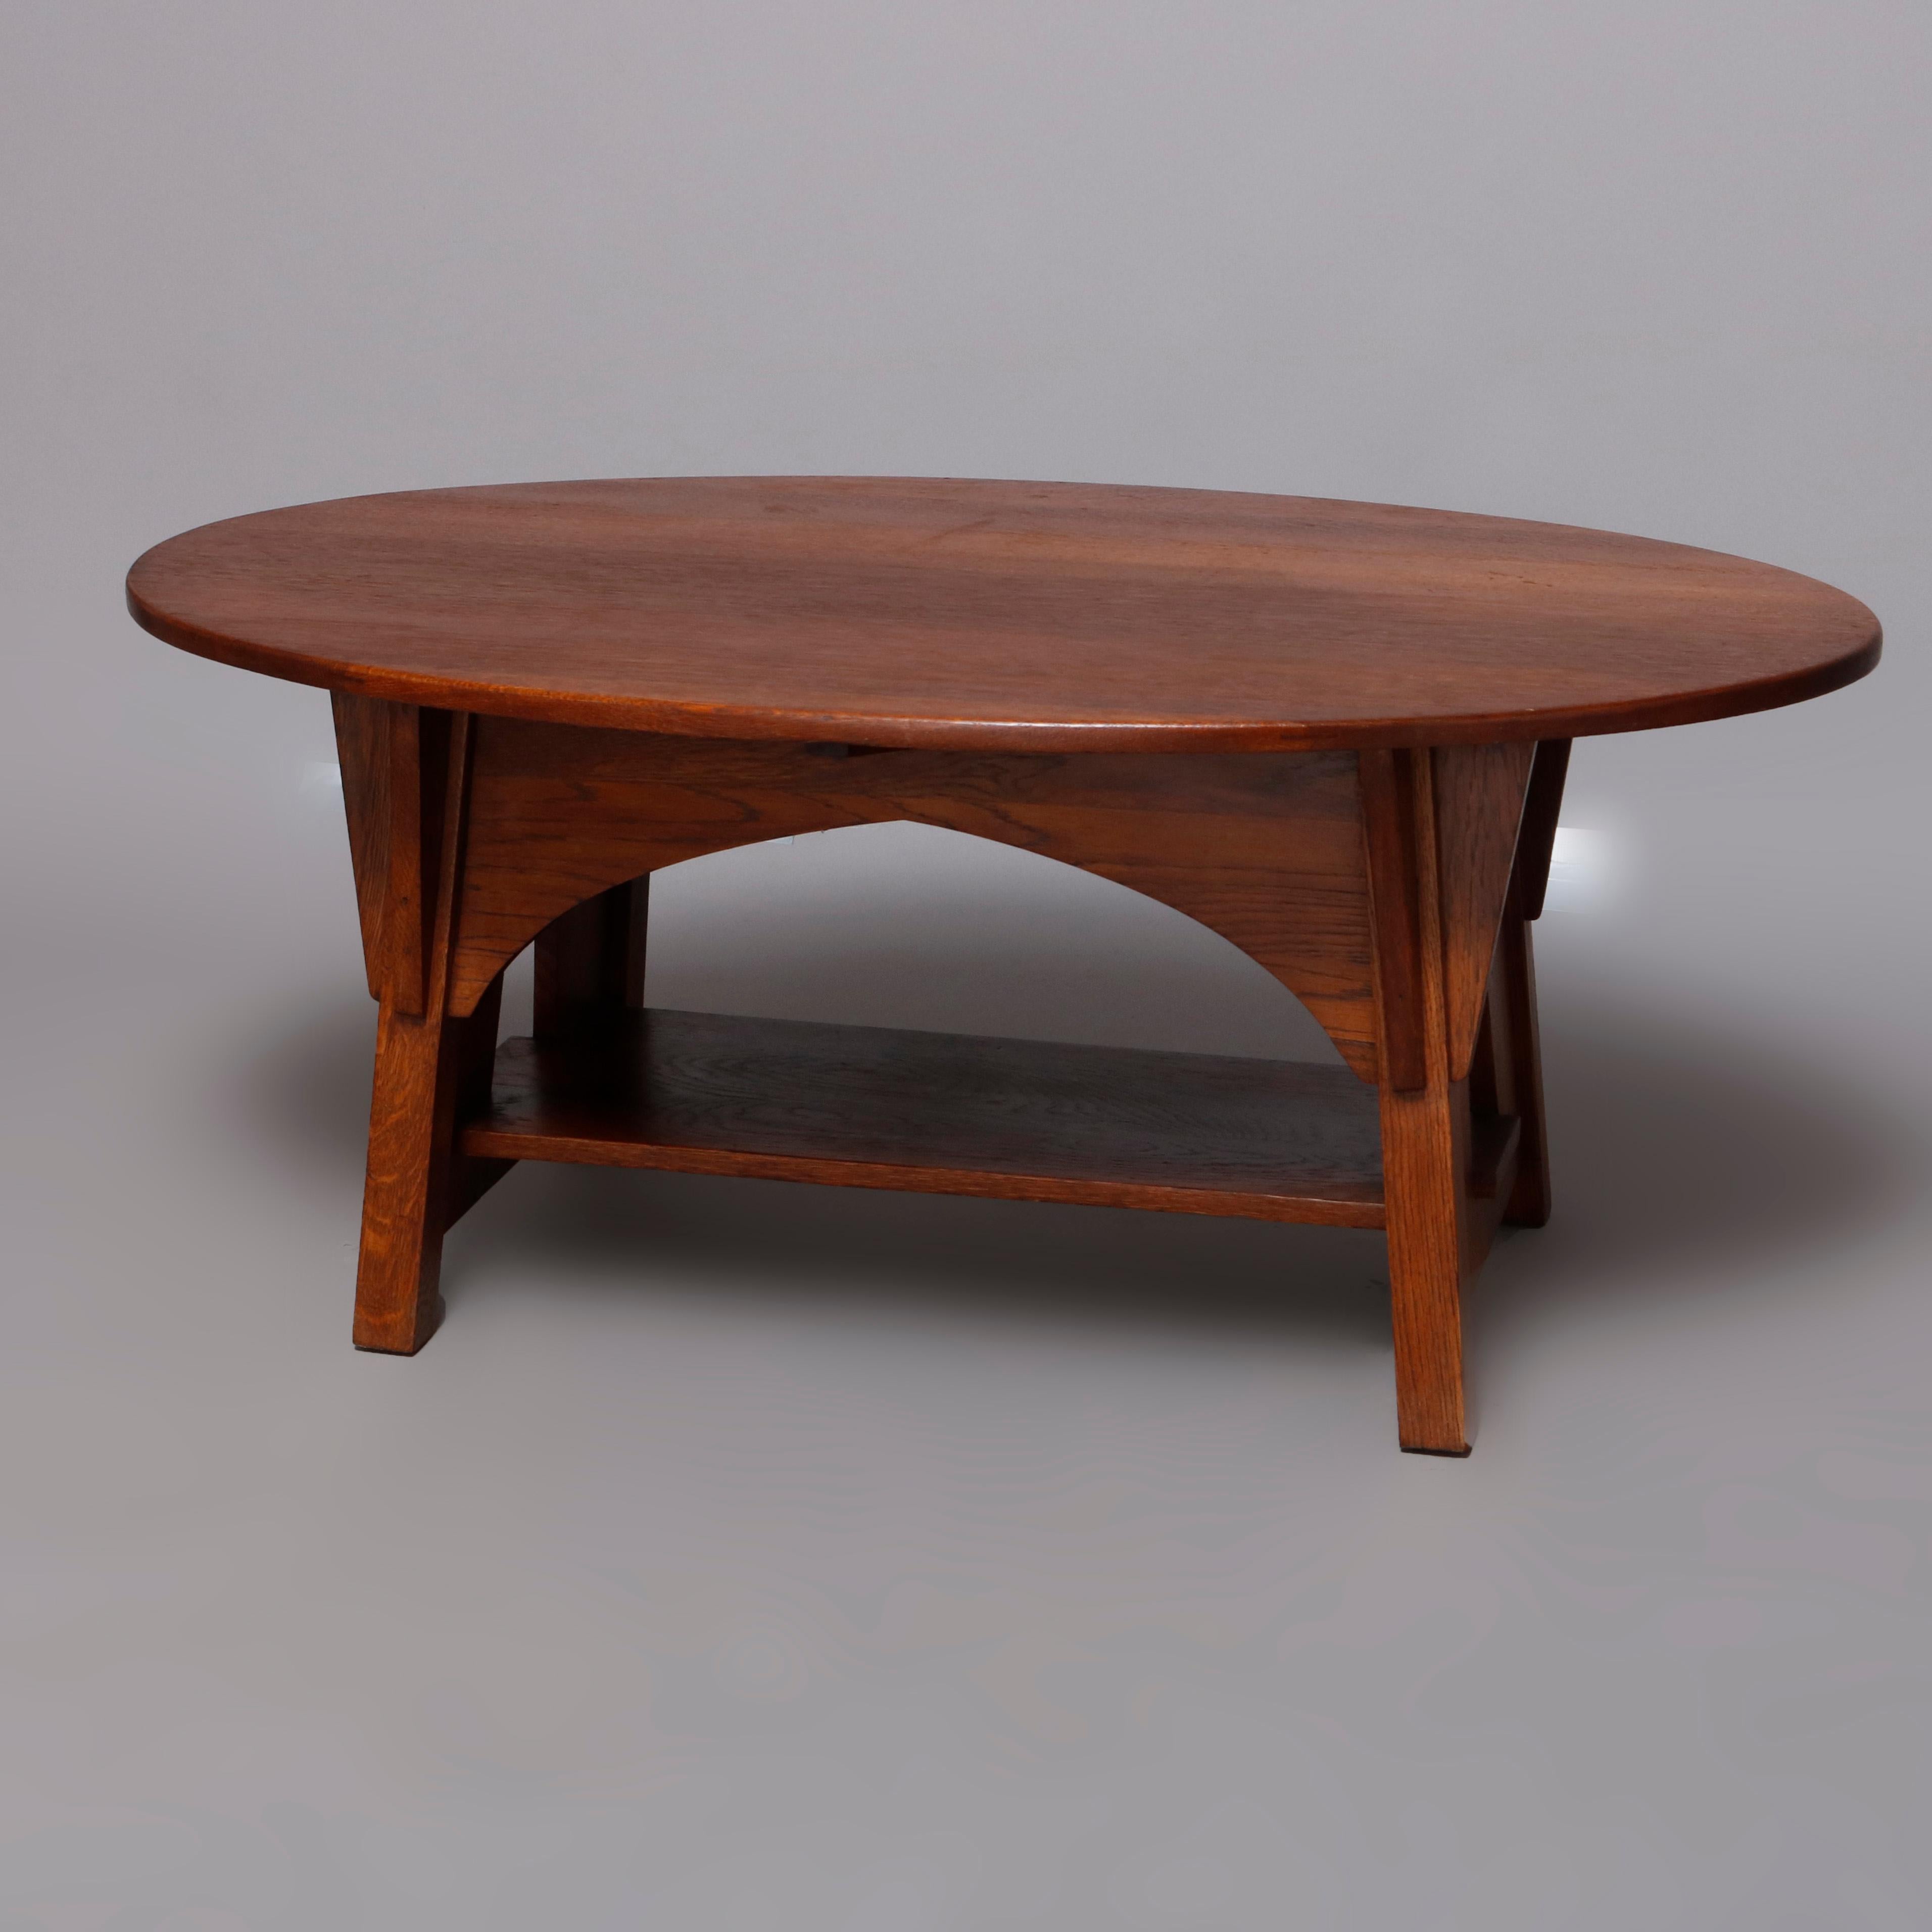 An antique Arts & Crafts mission oak coffee table by Limbert offers oval form with cut out trestle legs and having arched skirt, maker label on top verso as photographed, circa 1910

Measures: 19